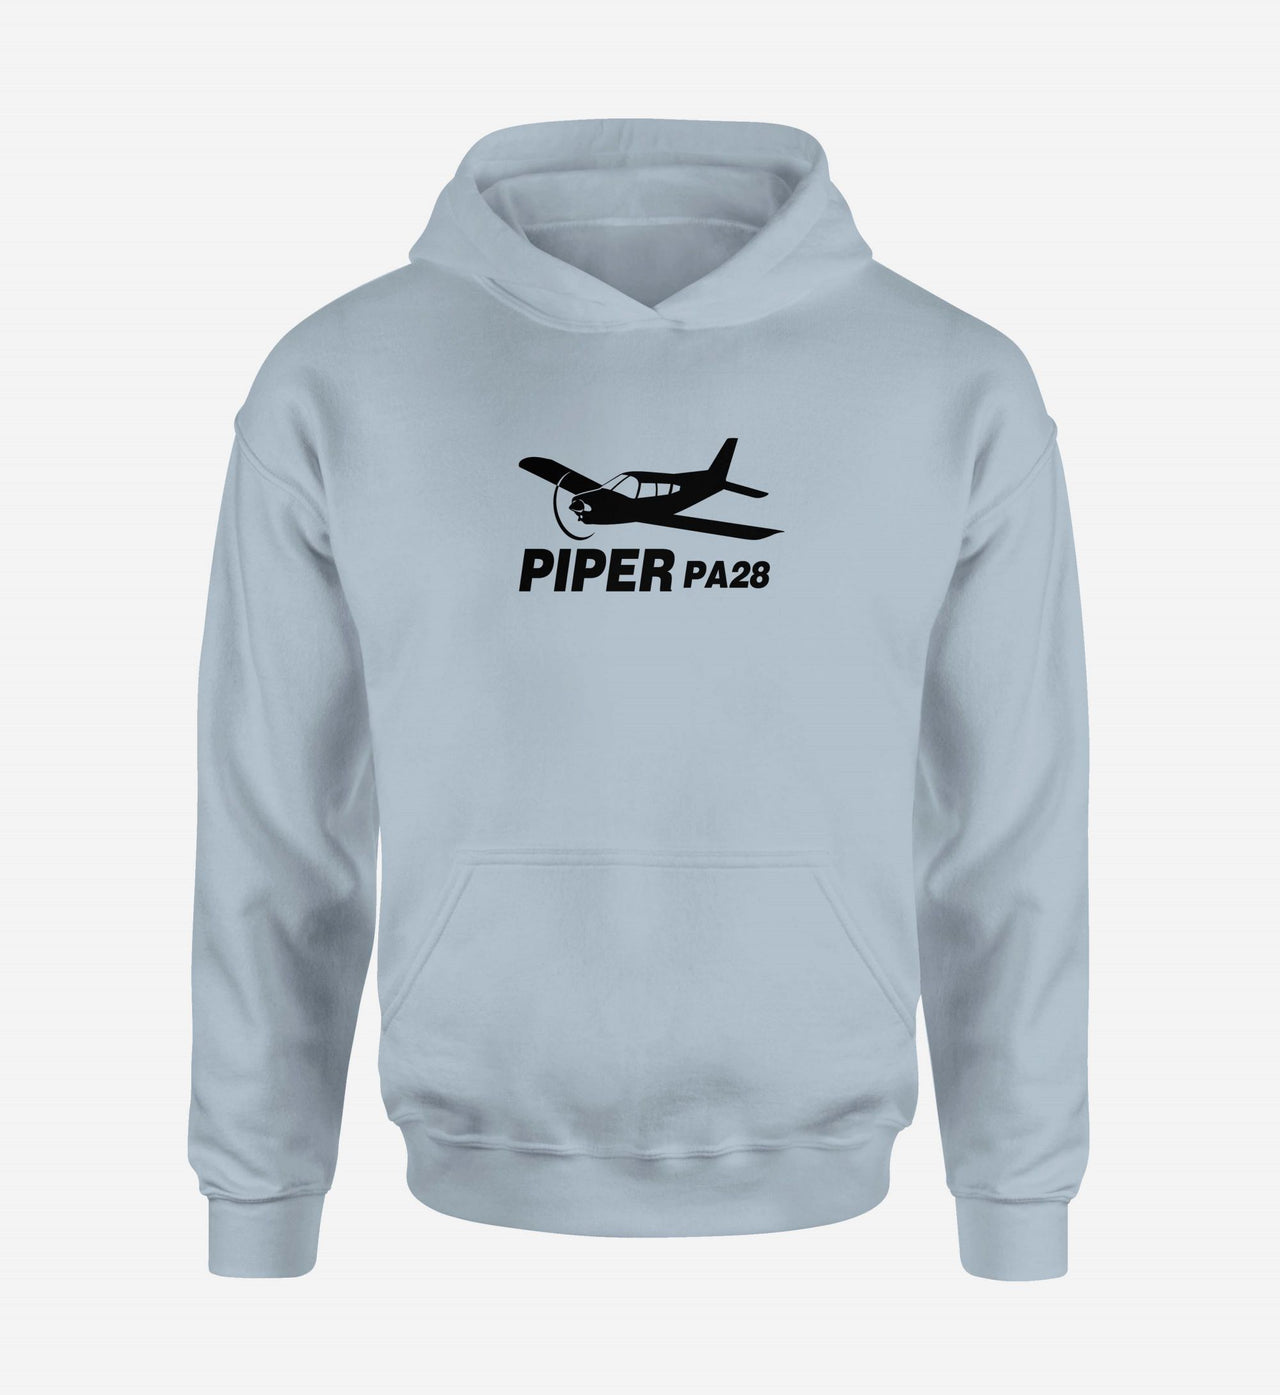 The Piper PA28 Designed Hoodies